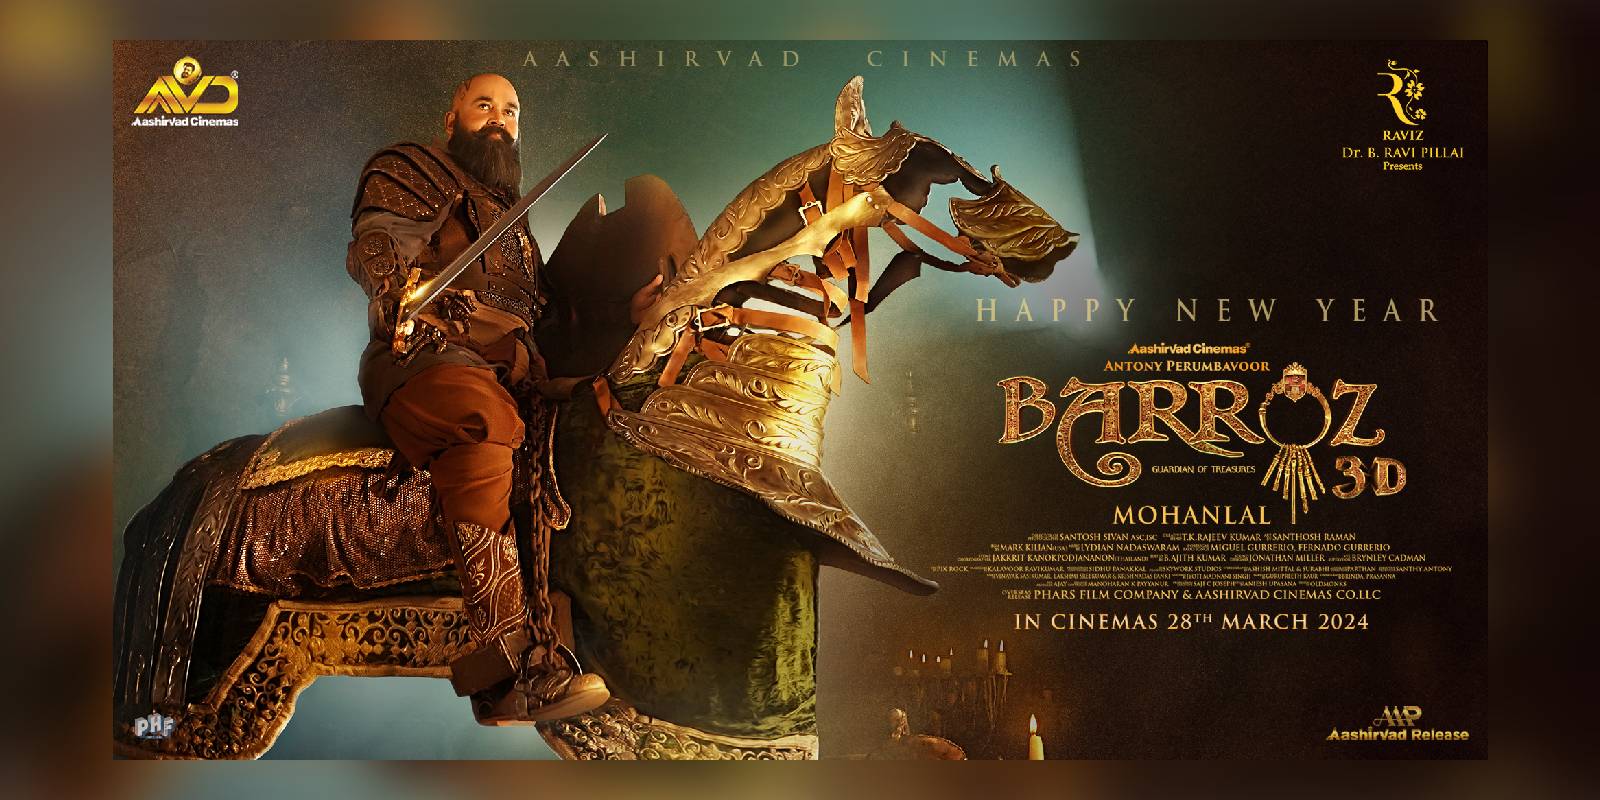 The new poster of Barroz